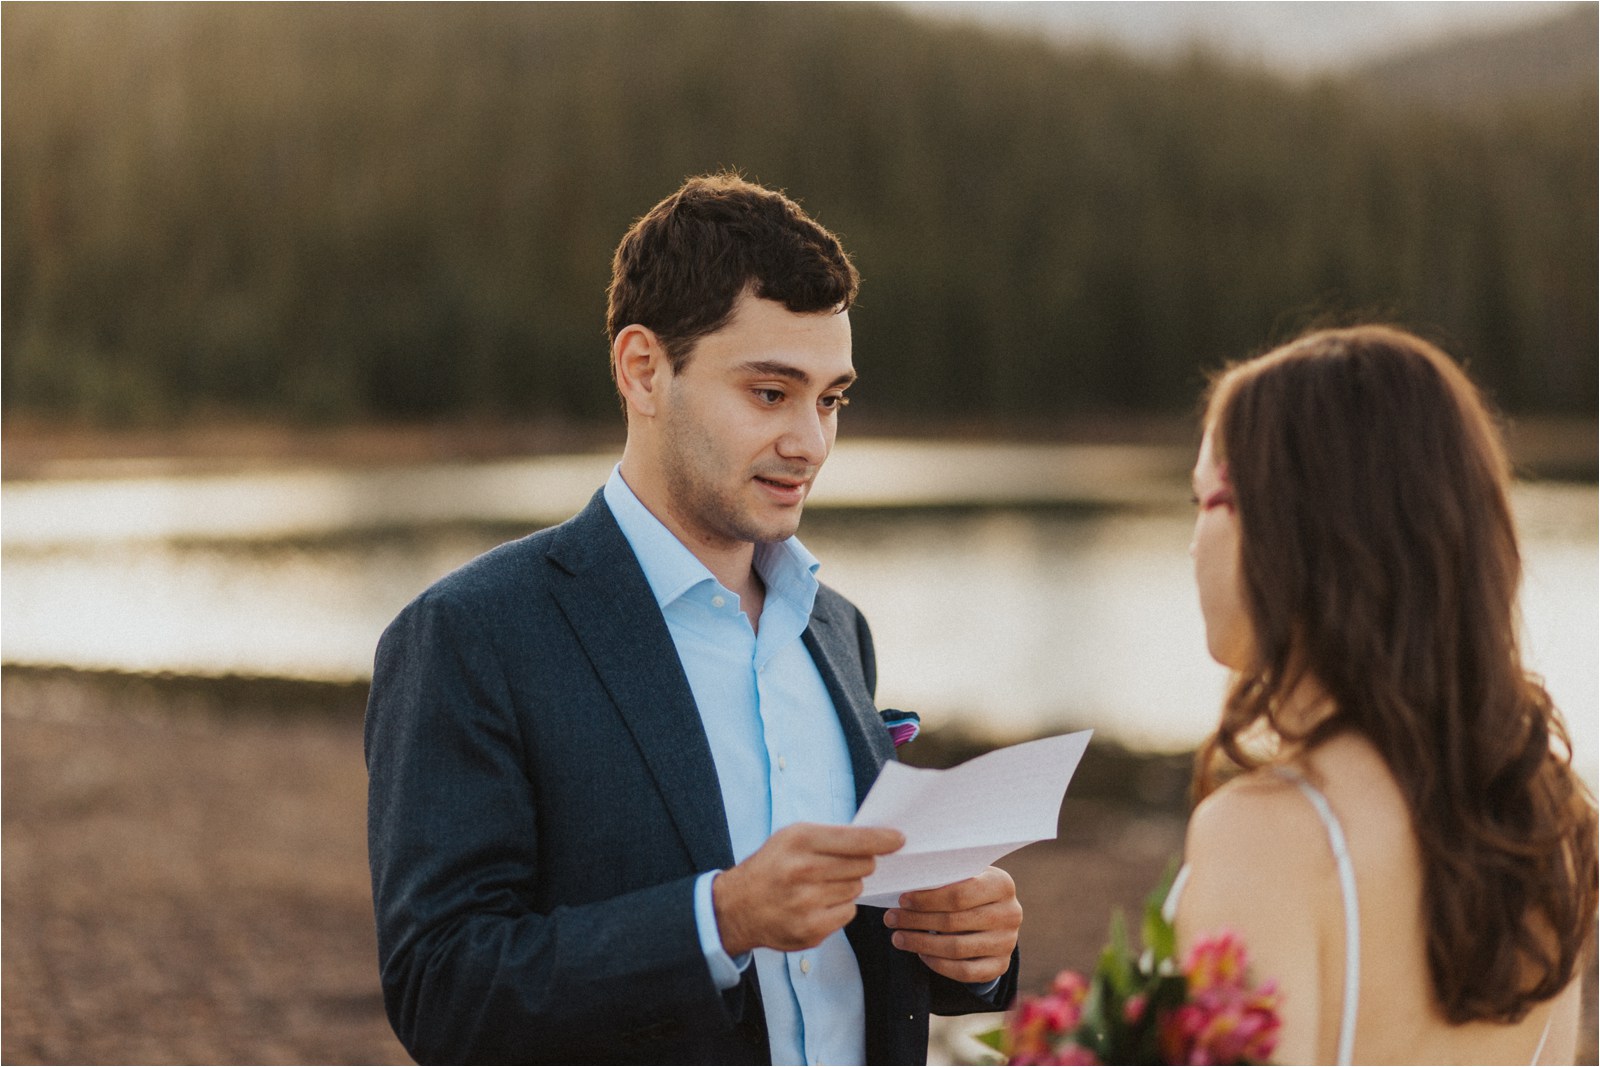 Emotional groom declaring his vows to his bride during their elopement in Colorado.